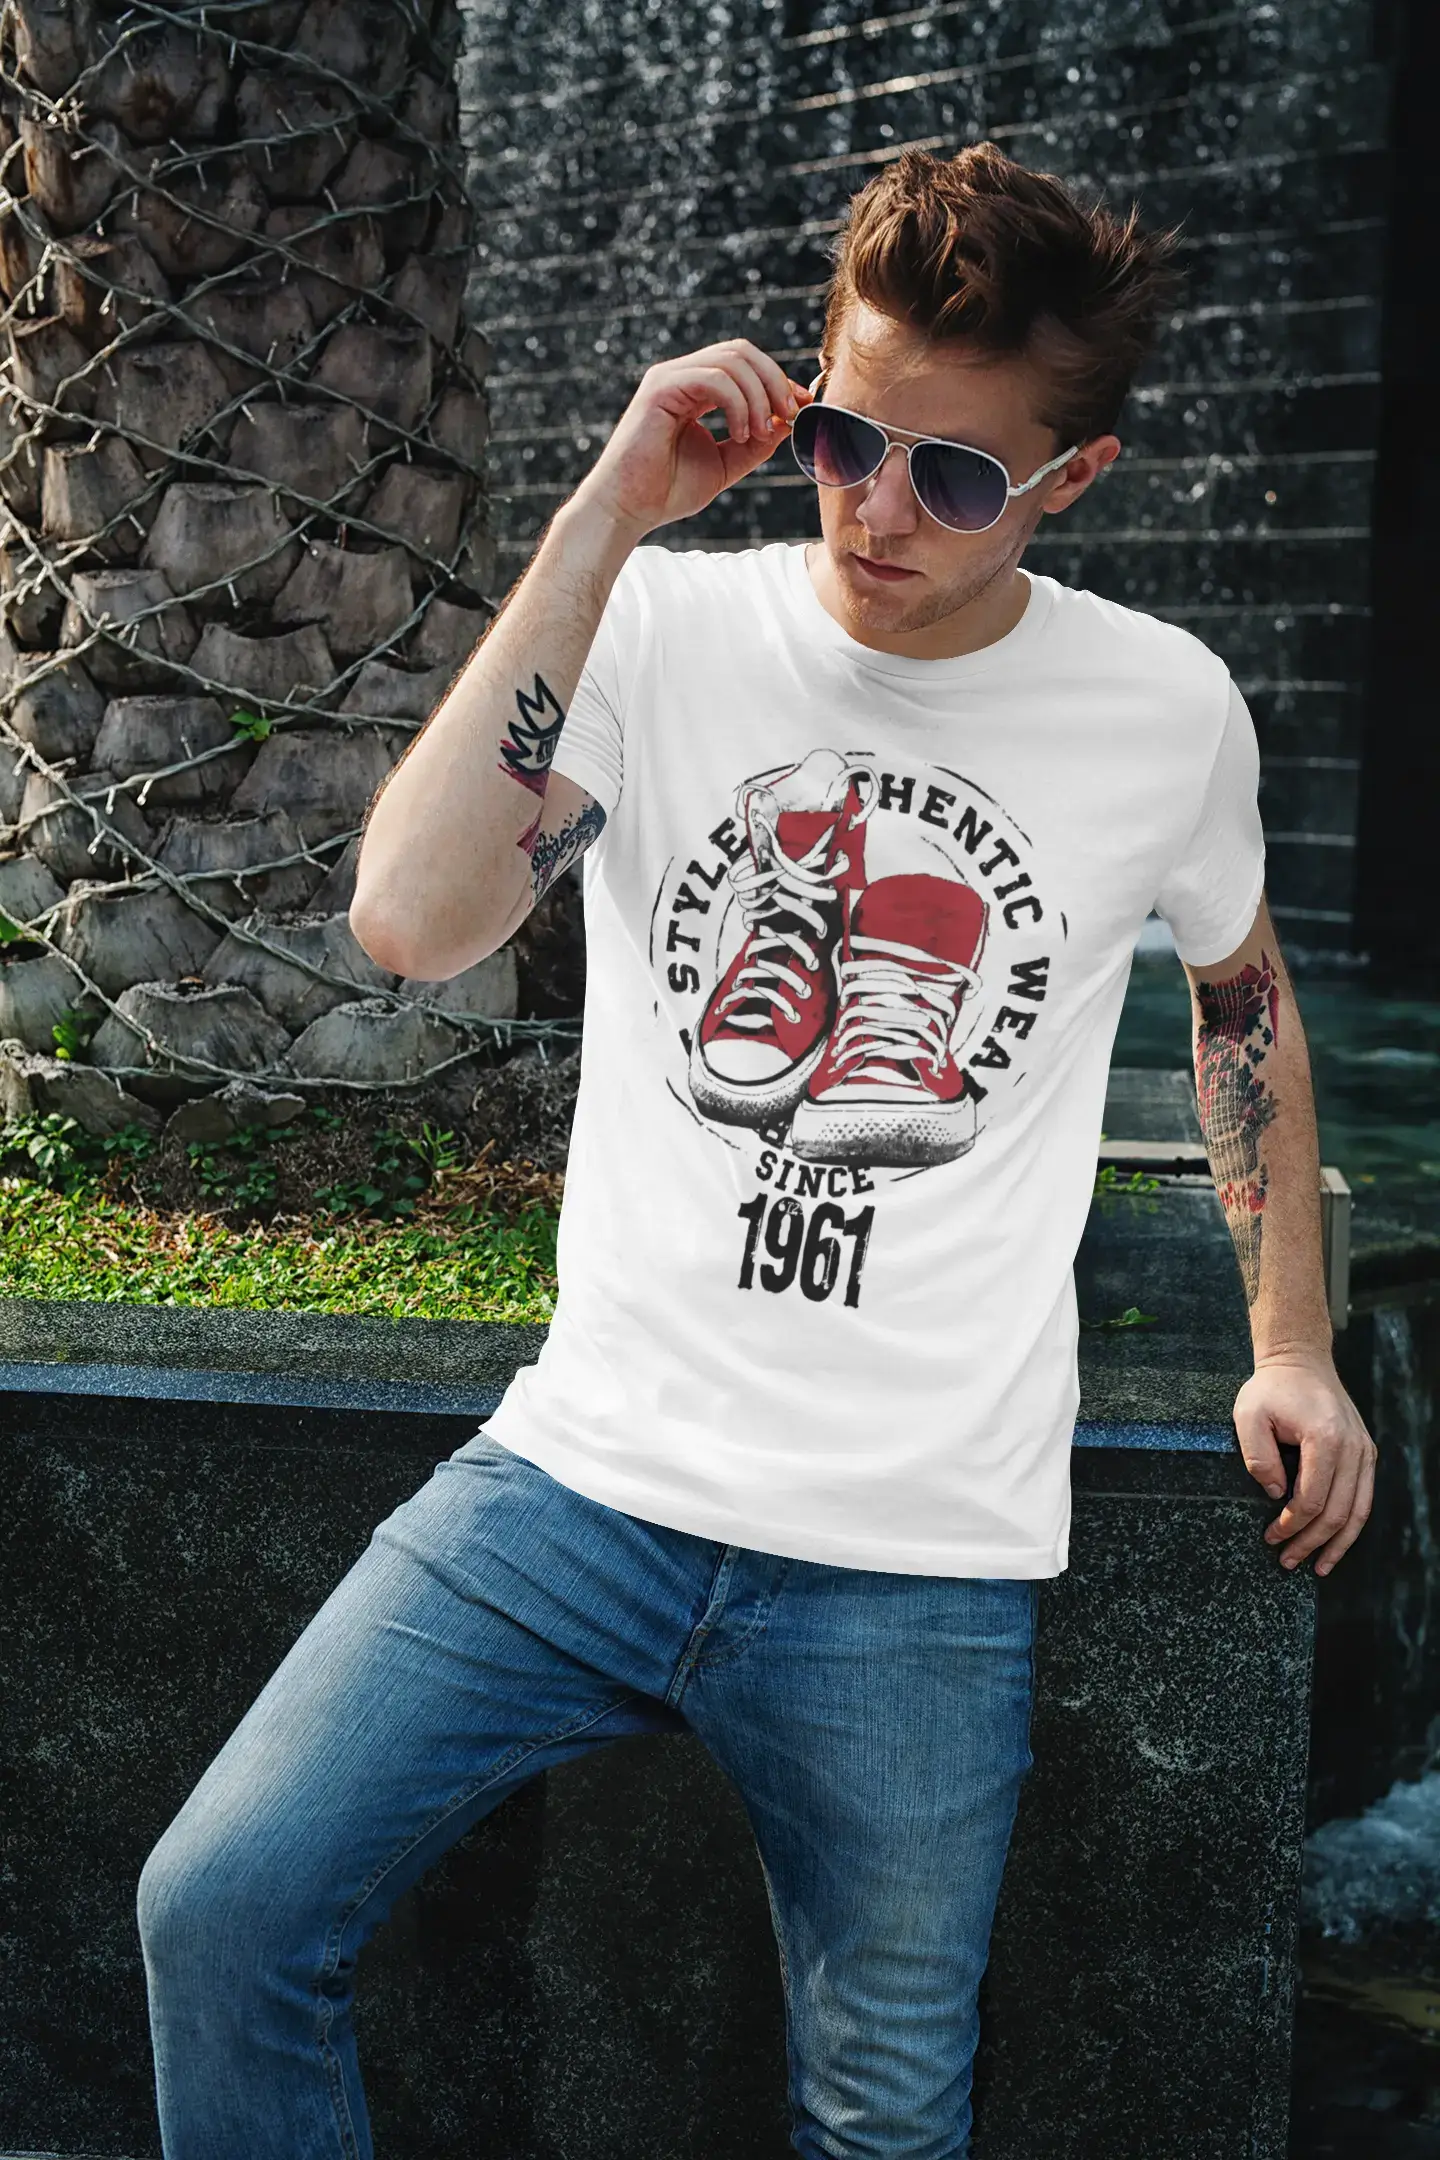 Men's Vintage Tee Shirt Graphic T shirt Authentic Style Since 1961 White